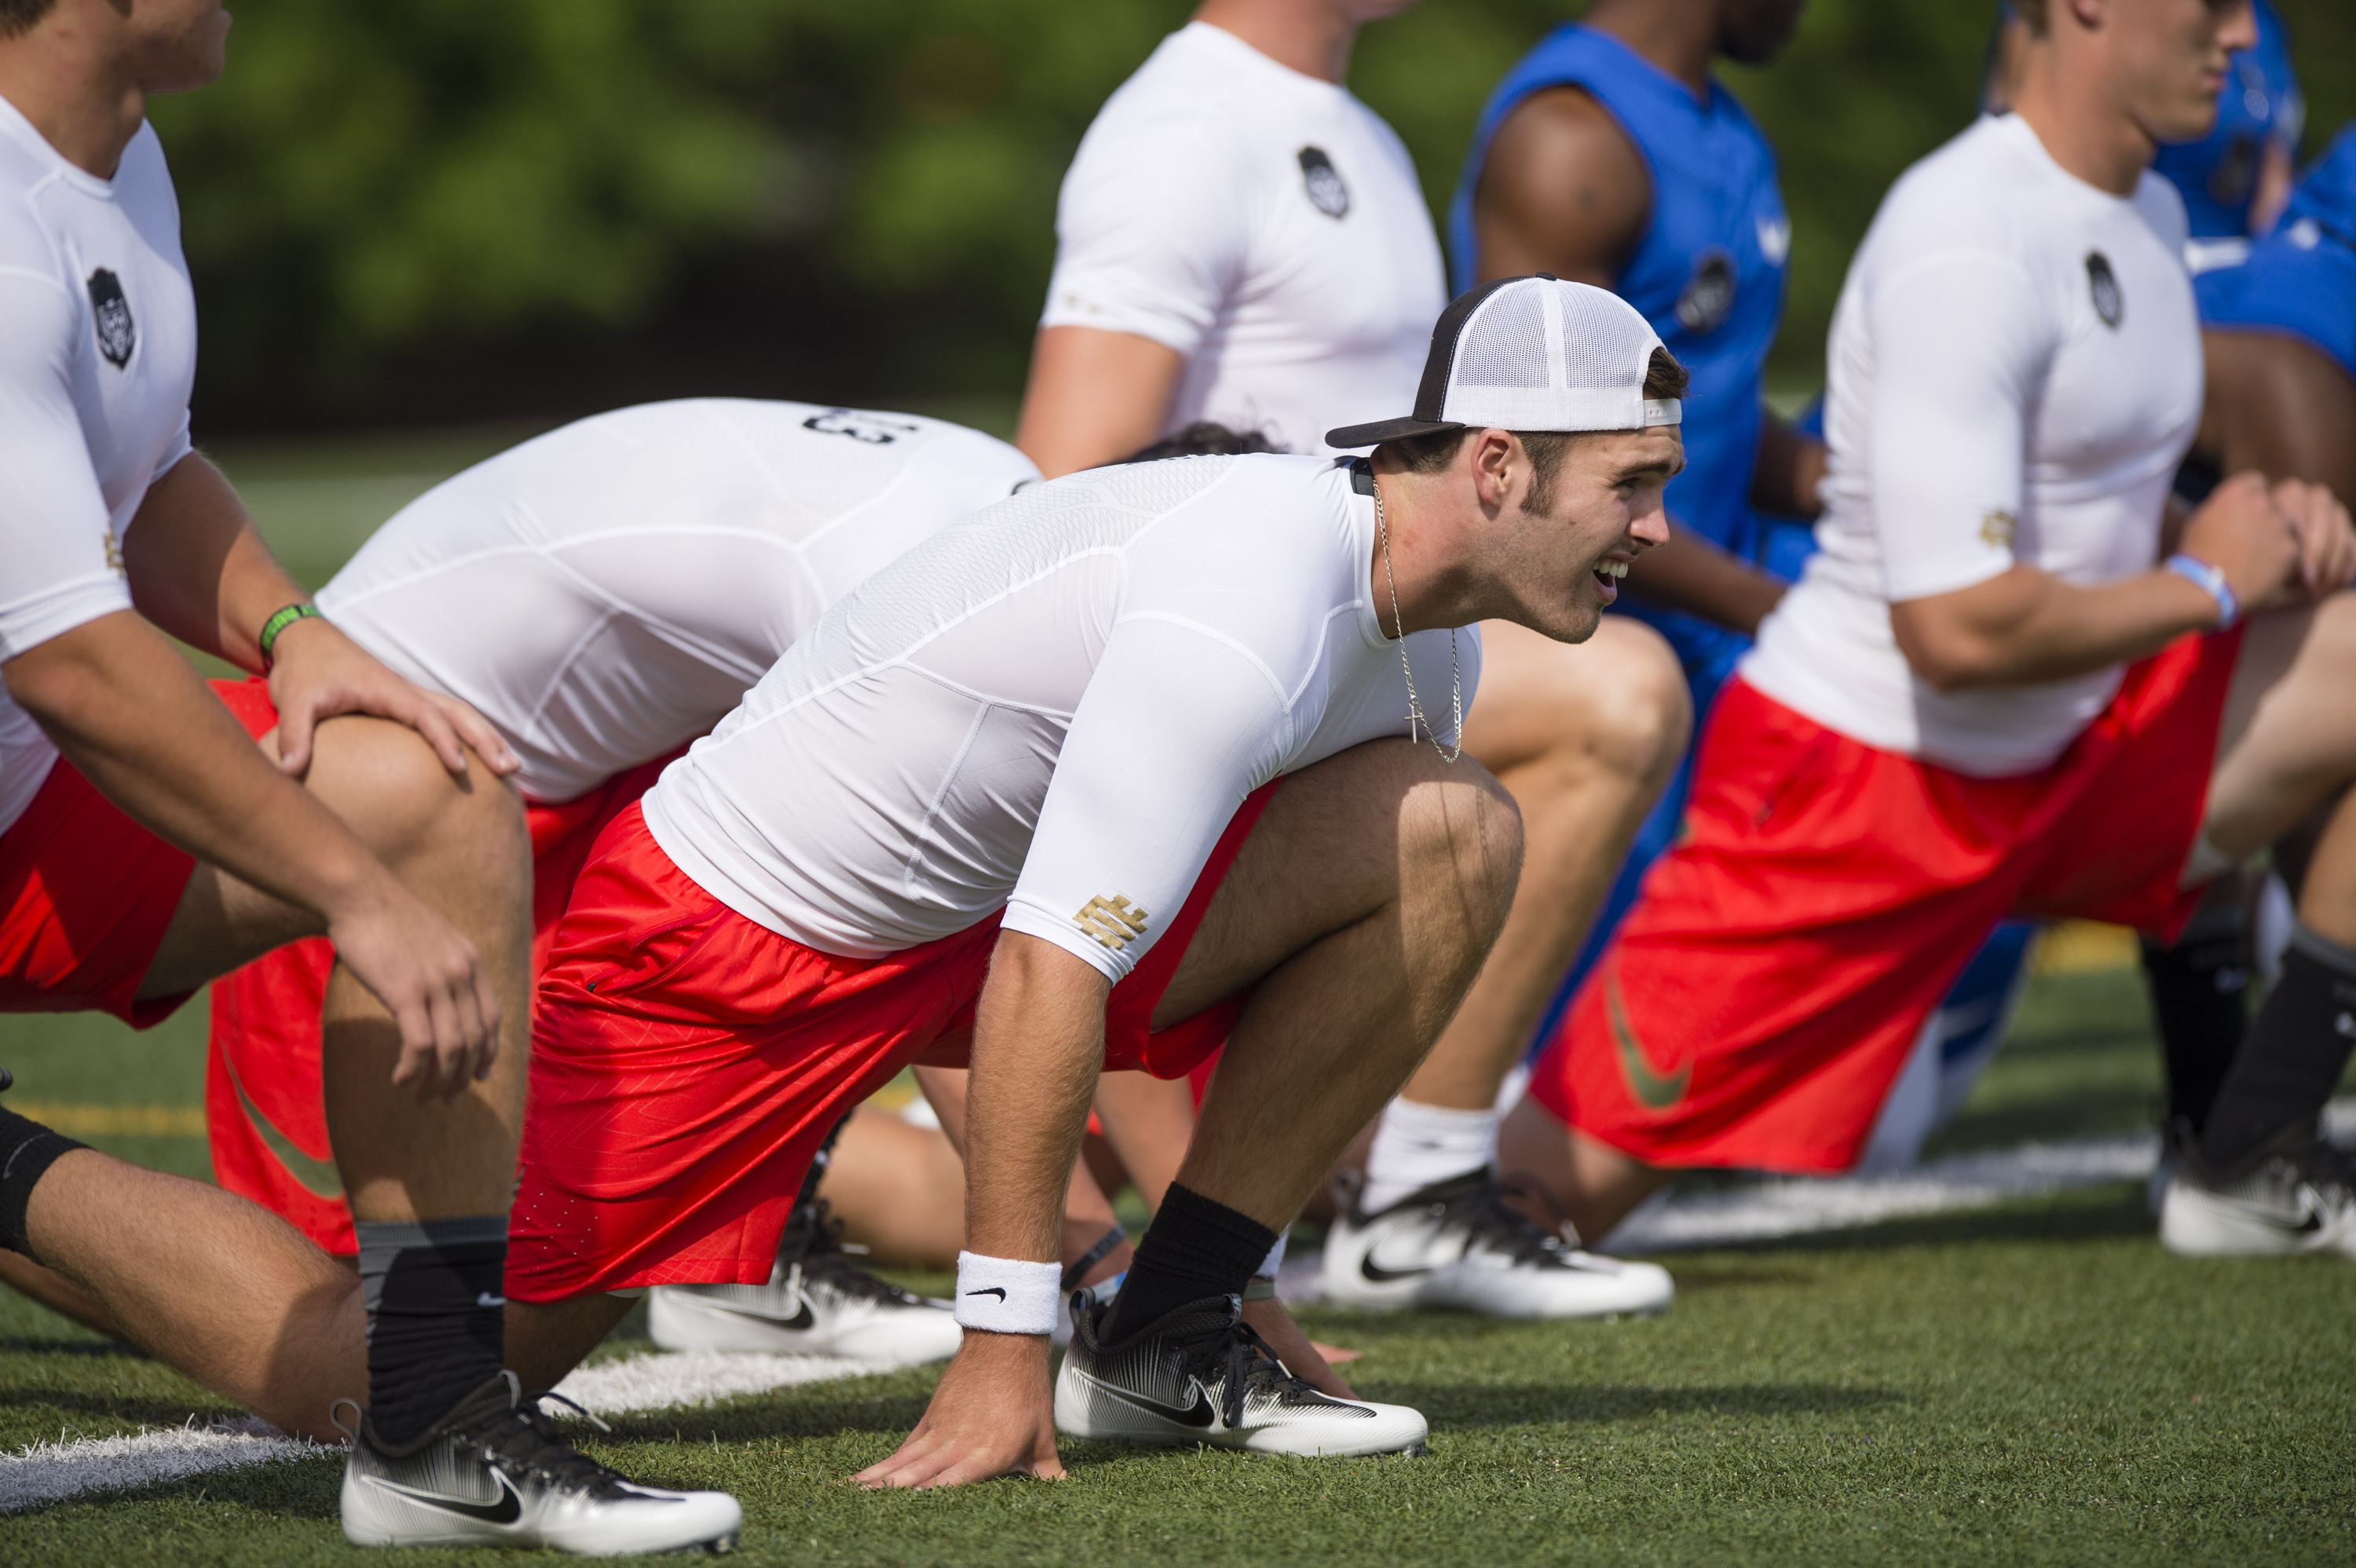 July 6, 2016 -- Beaverton, OR, U.S.A -- Quarterback Jake Fromm of Houston County (Georgia) warms up at The Opening and Elite 11 high school football camp at Nike headquarters in Oregon. -- Photo by Troy Wayrynen-USA TODAY Sports Images, Gannett ORG XMIT: US 135130 opening/ elite 1 7/6/2016 [Via MerlinFTP Drop]